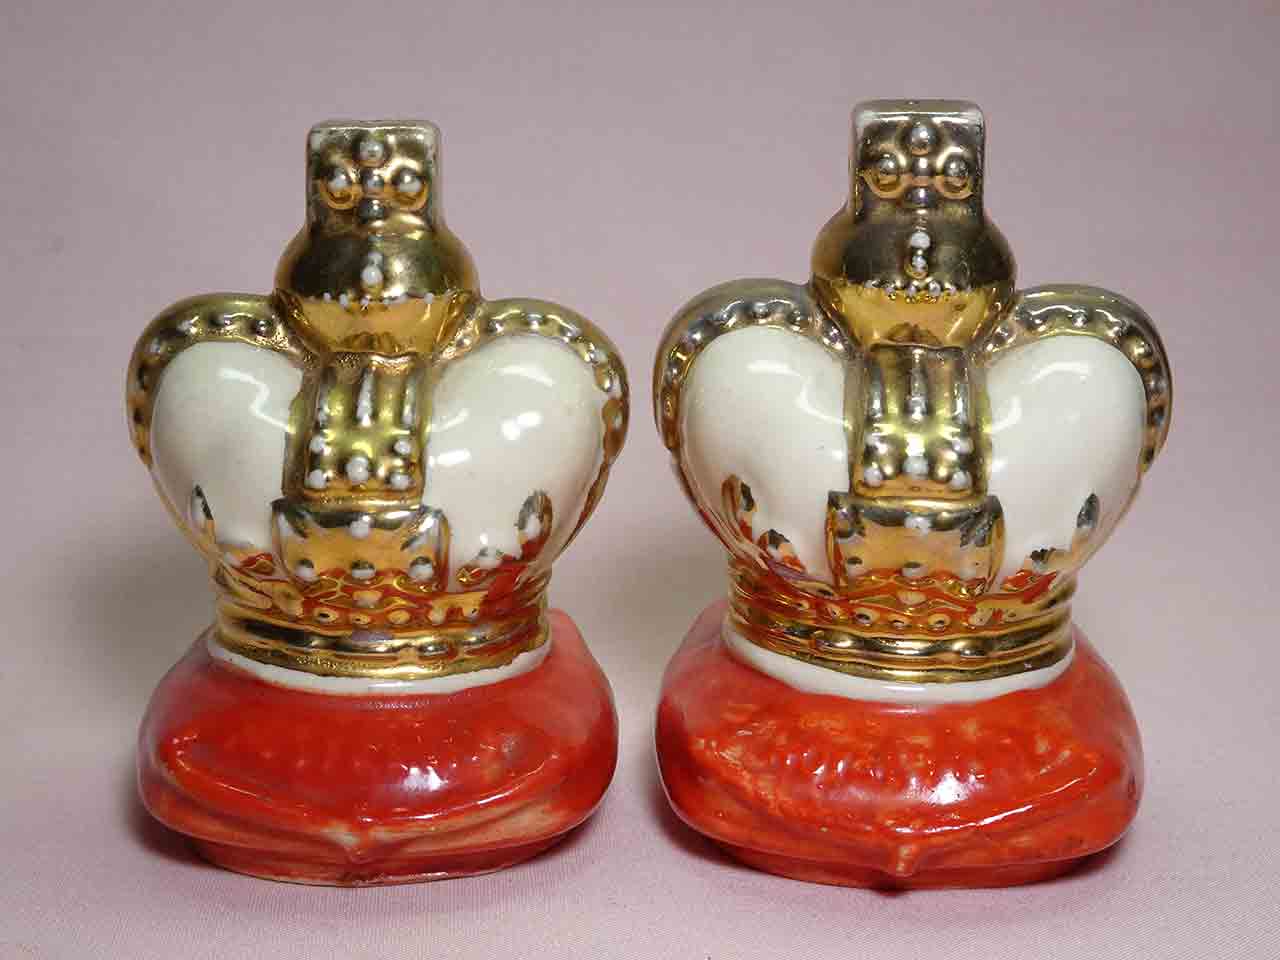 Royal Visit crowns from Australia salt and pepper shakers